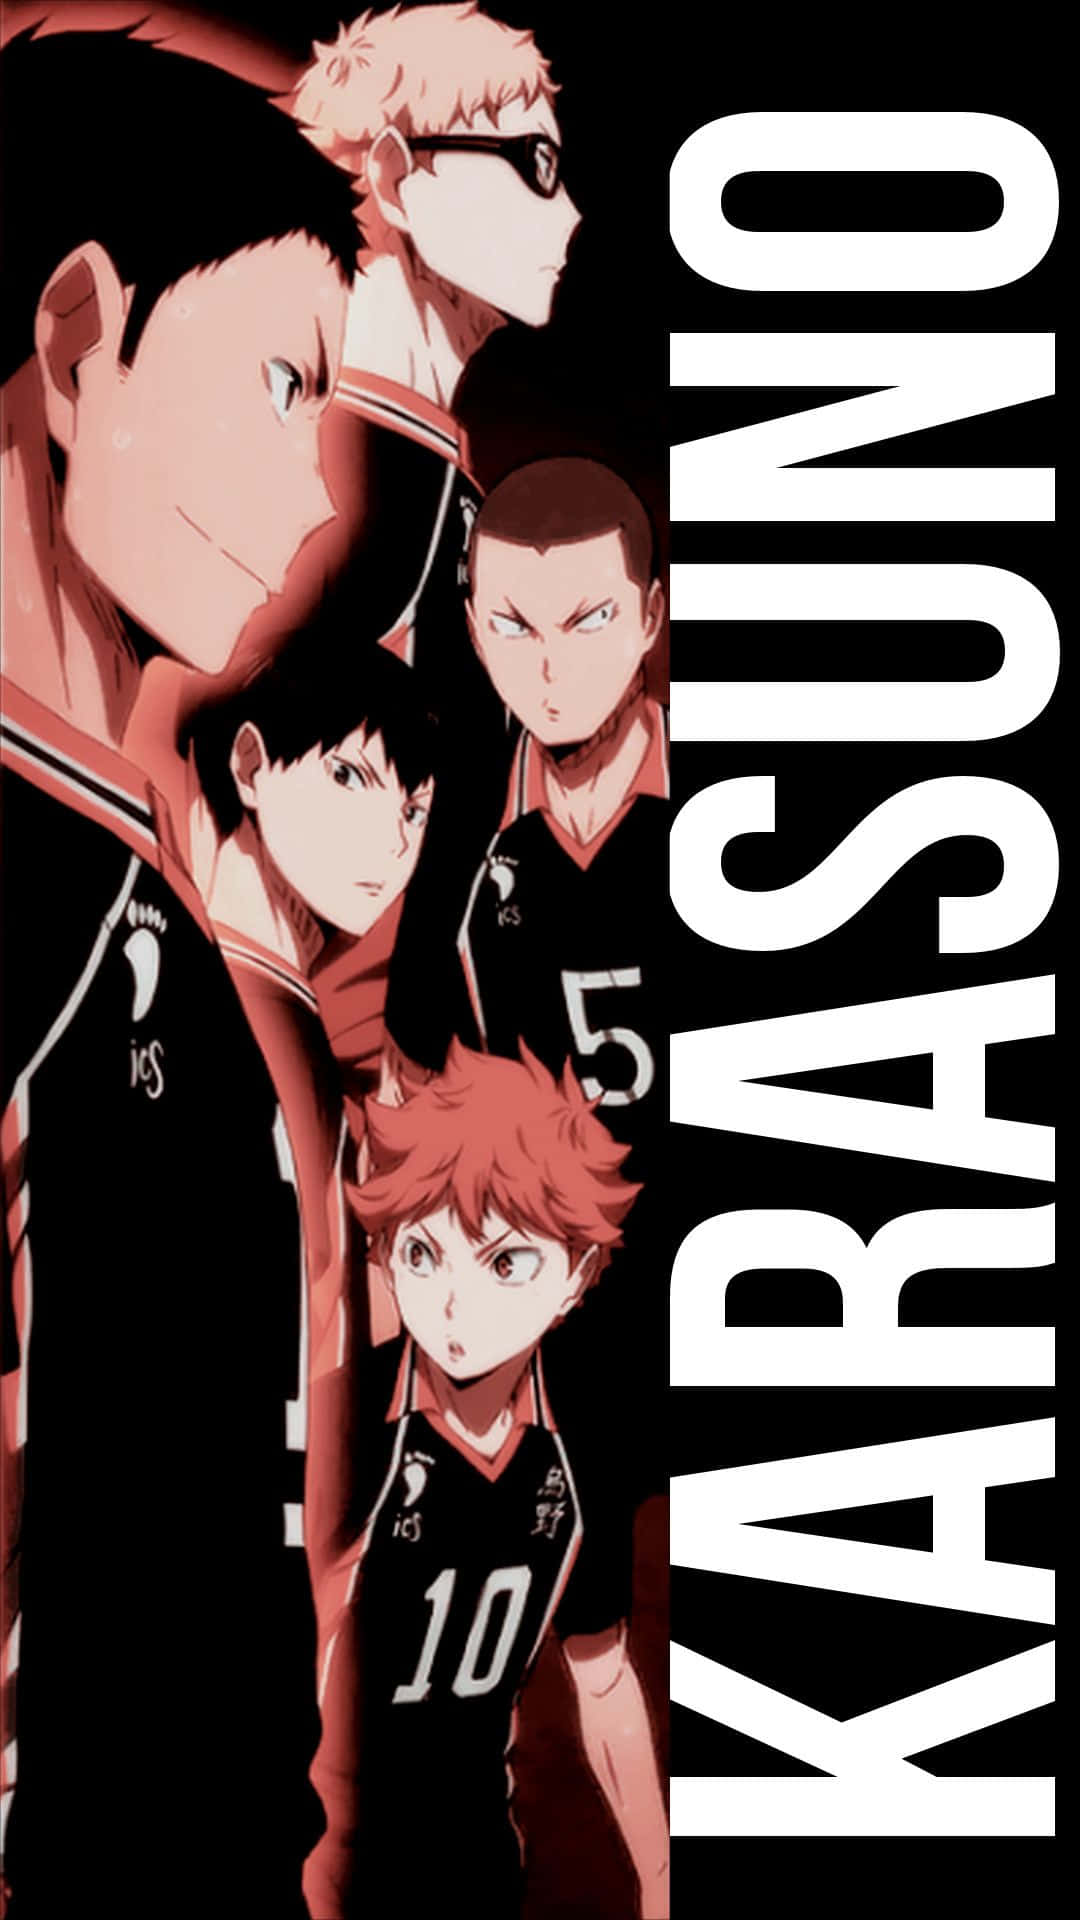 Don't Miss A Moment of the Excitement, Catch the Latest Haikyuu Match on Your Iphone Wallpaper